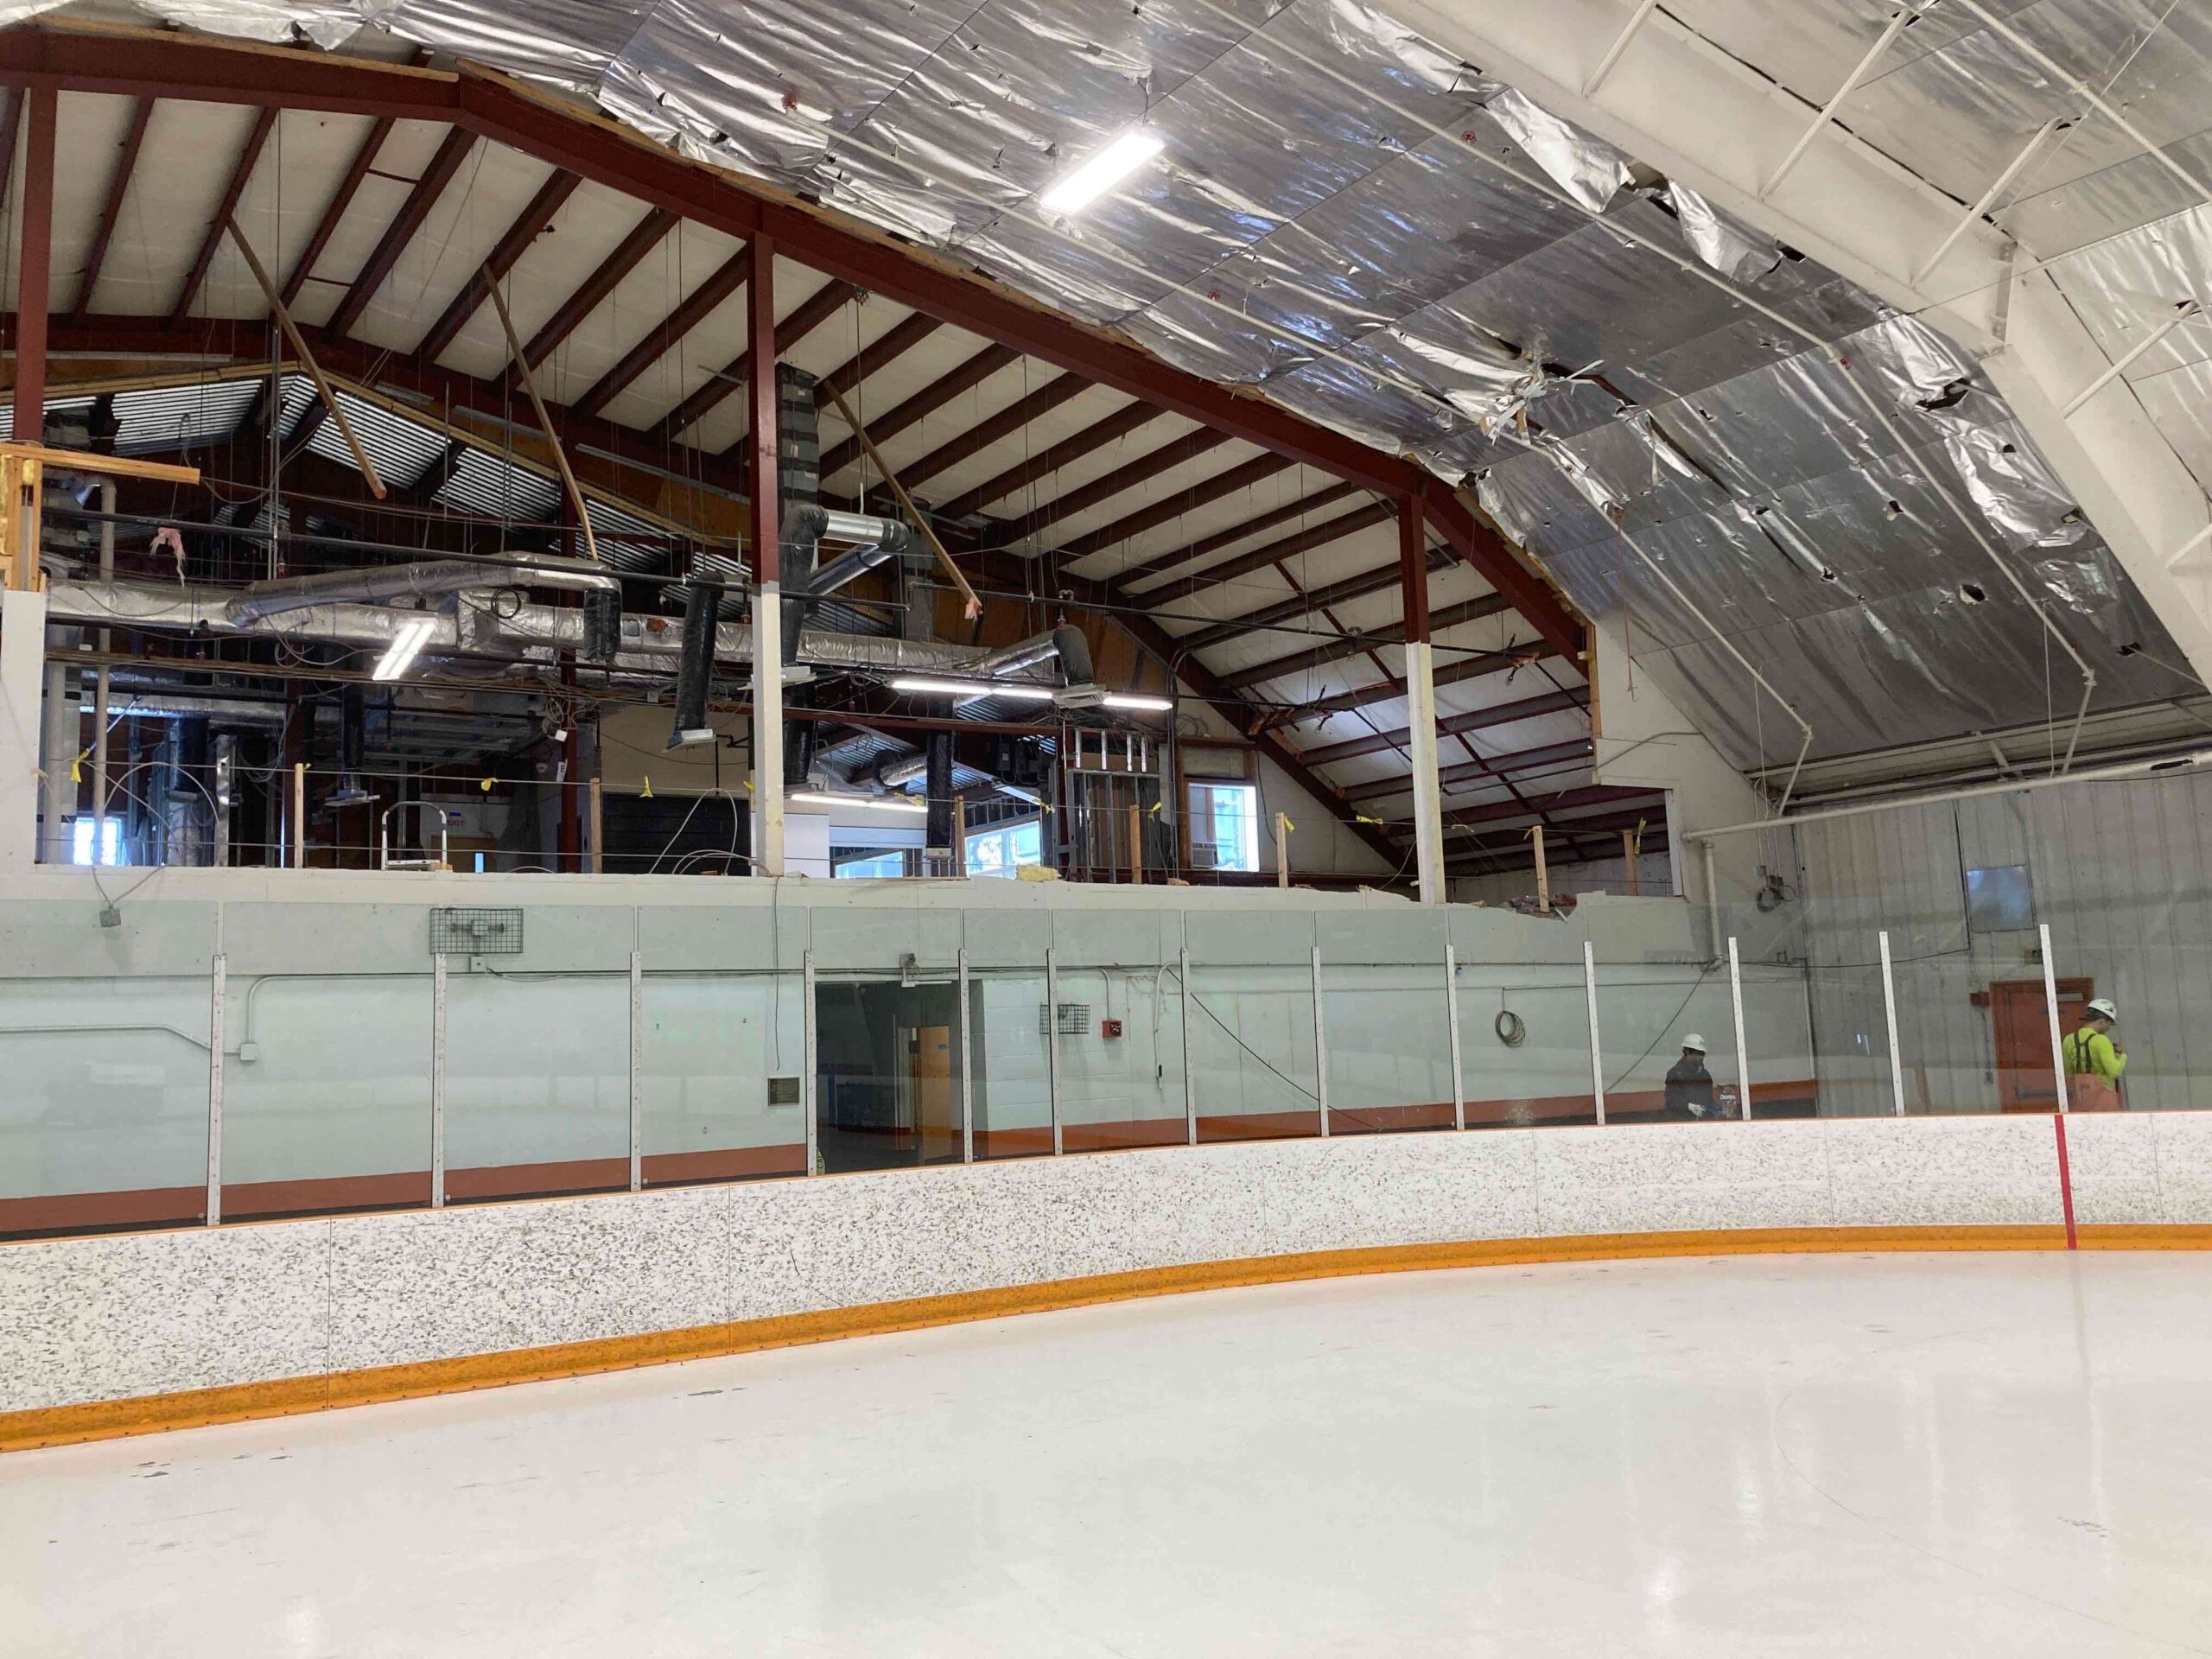 Construction on the Travis Roy Ice Arena